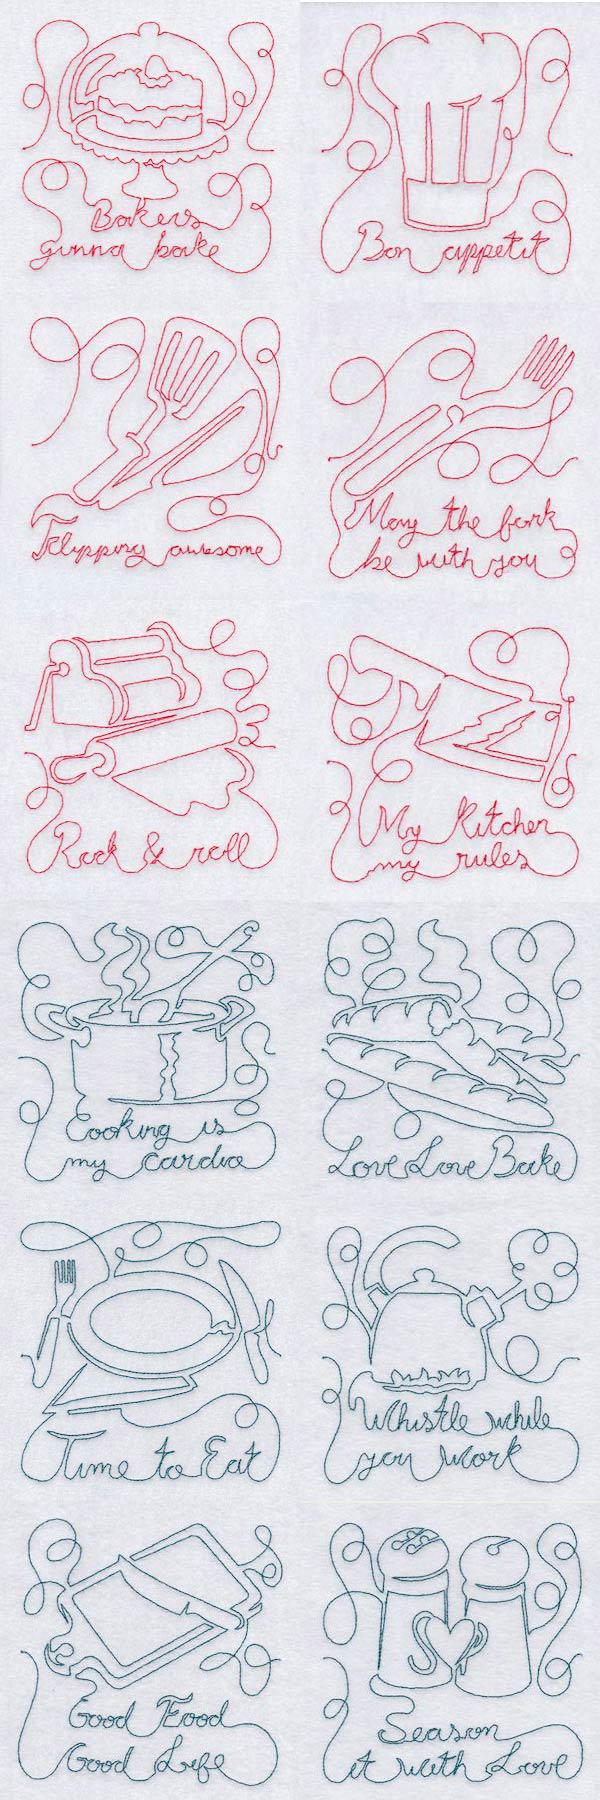 Free Motion Kitchen 2 Small Embroidery Machine Design Details